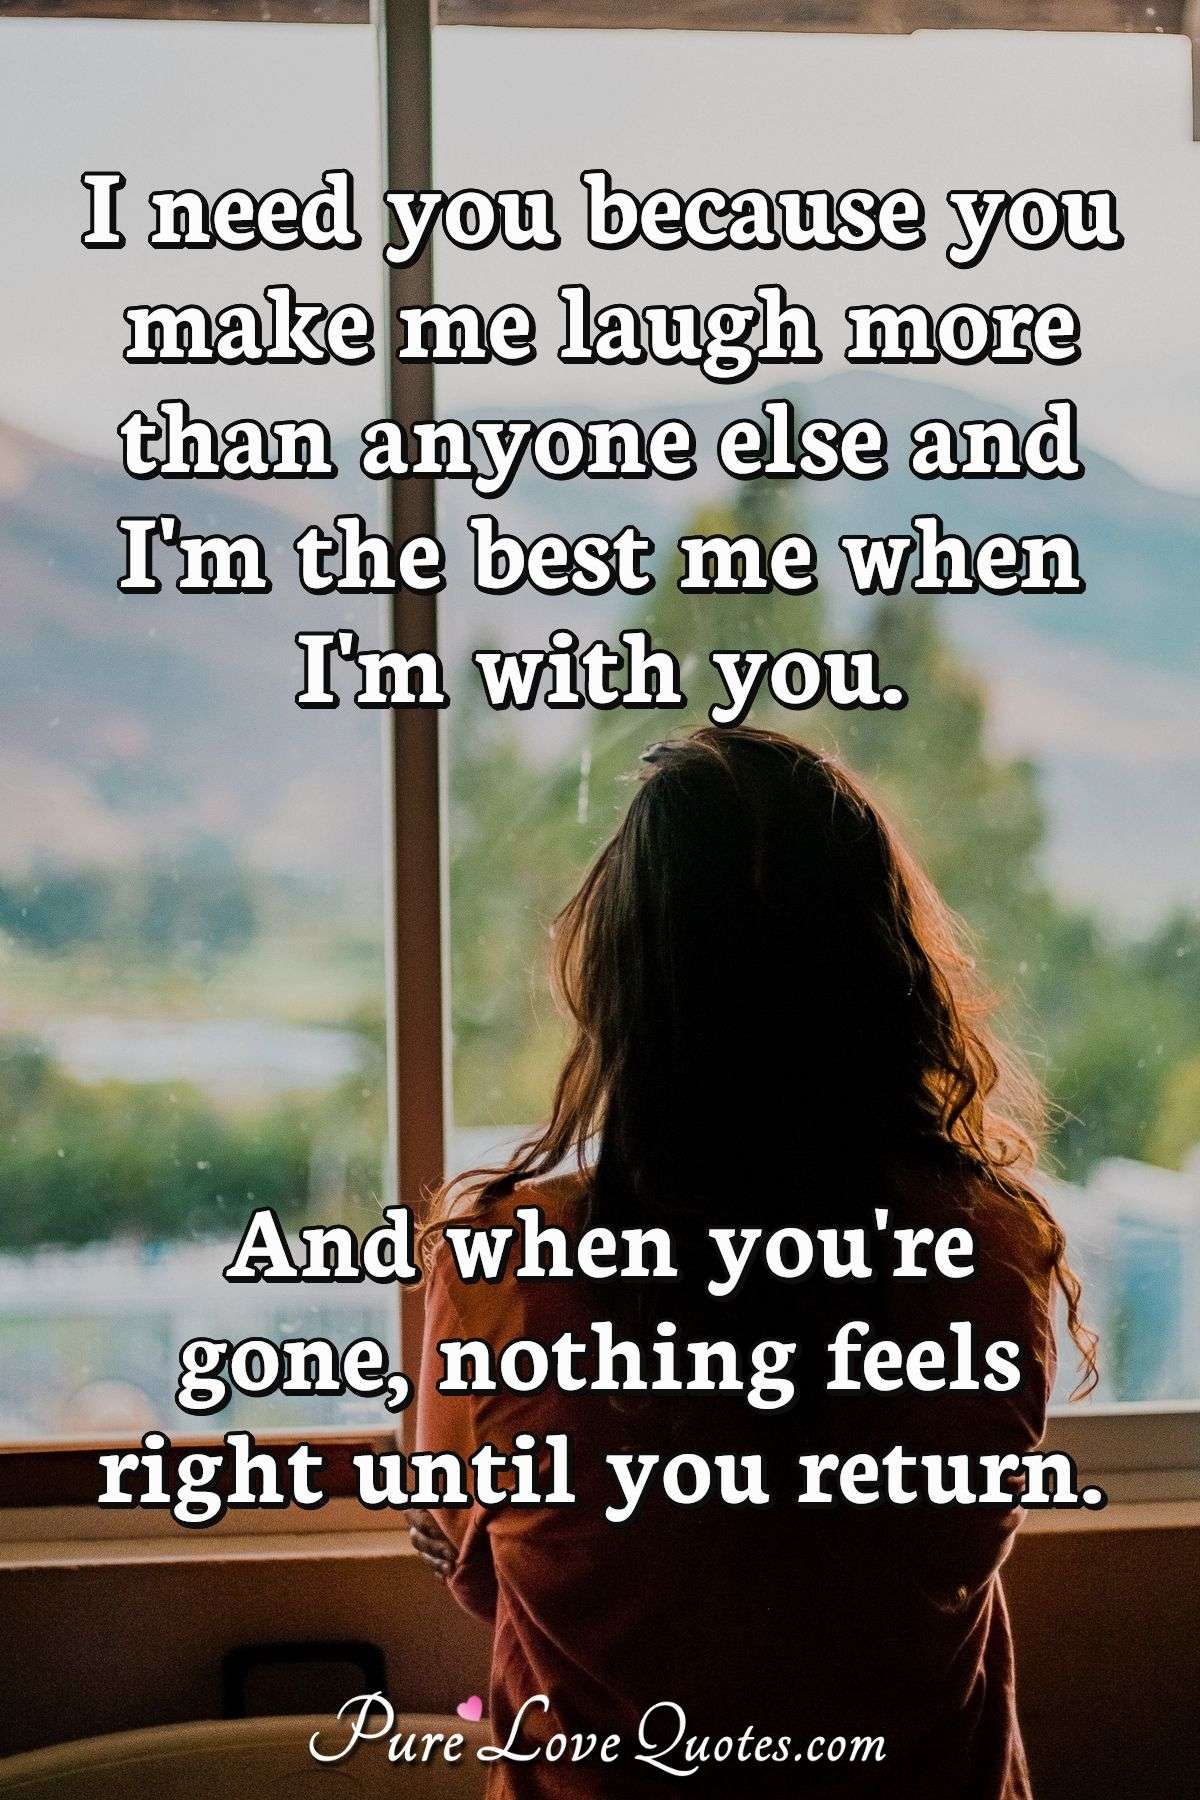 I need you because you make me laugh more than anyone else and I'm the best me when I'm with you. And when you're gone, nothing feels right until you return. - Anonymous